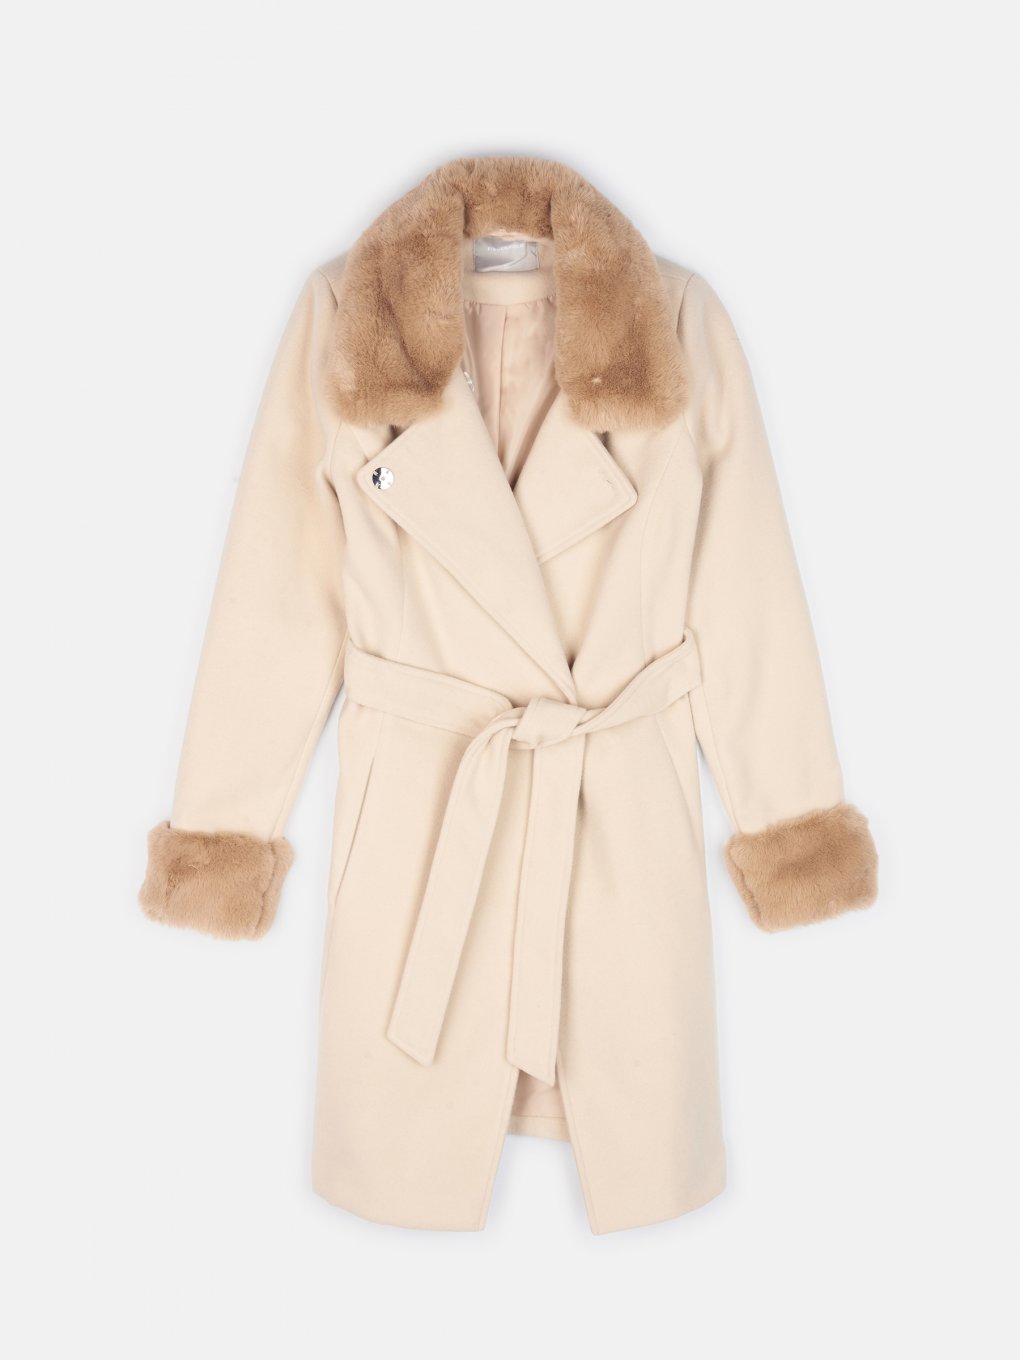 Robe coat with faux fur details